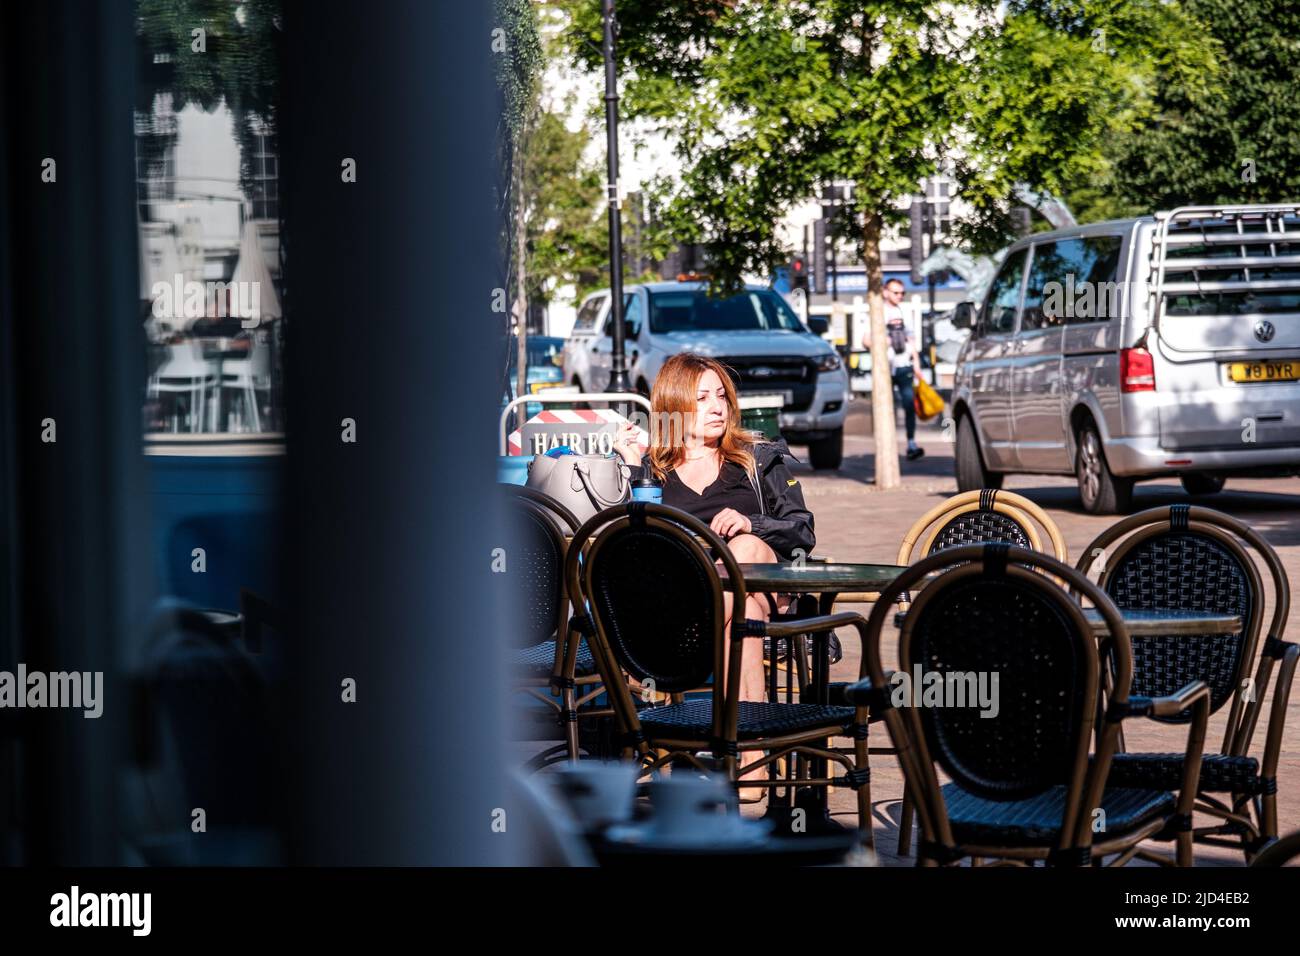 Epsom Surrey, London, June 11 2022, Woman With Red Hair Sitting Alone Outside Cafe Nero Relaxing Stock Photo